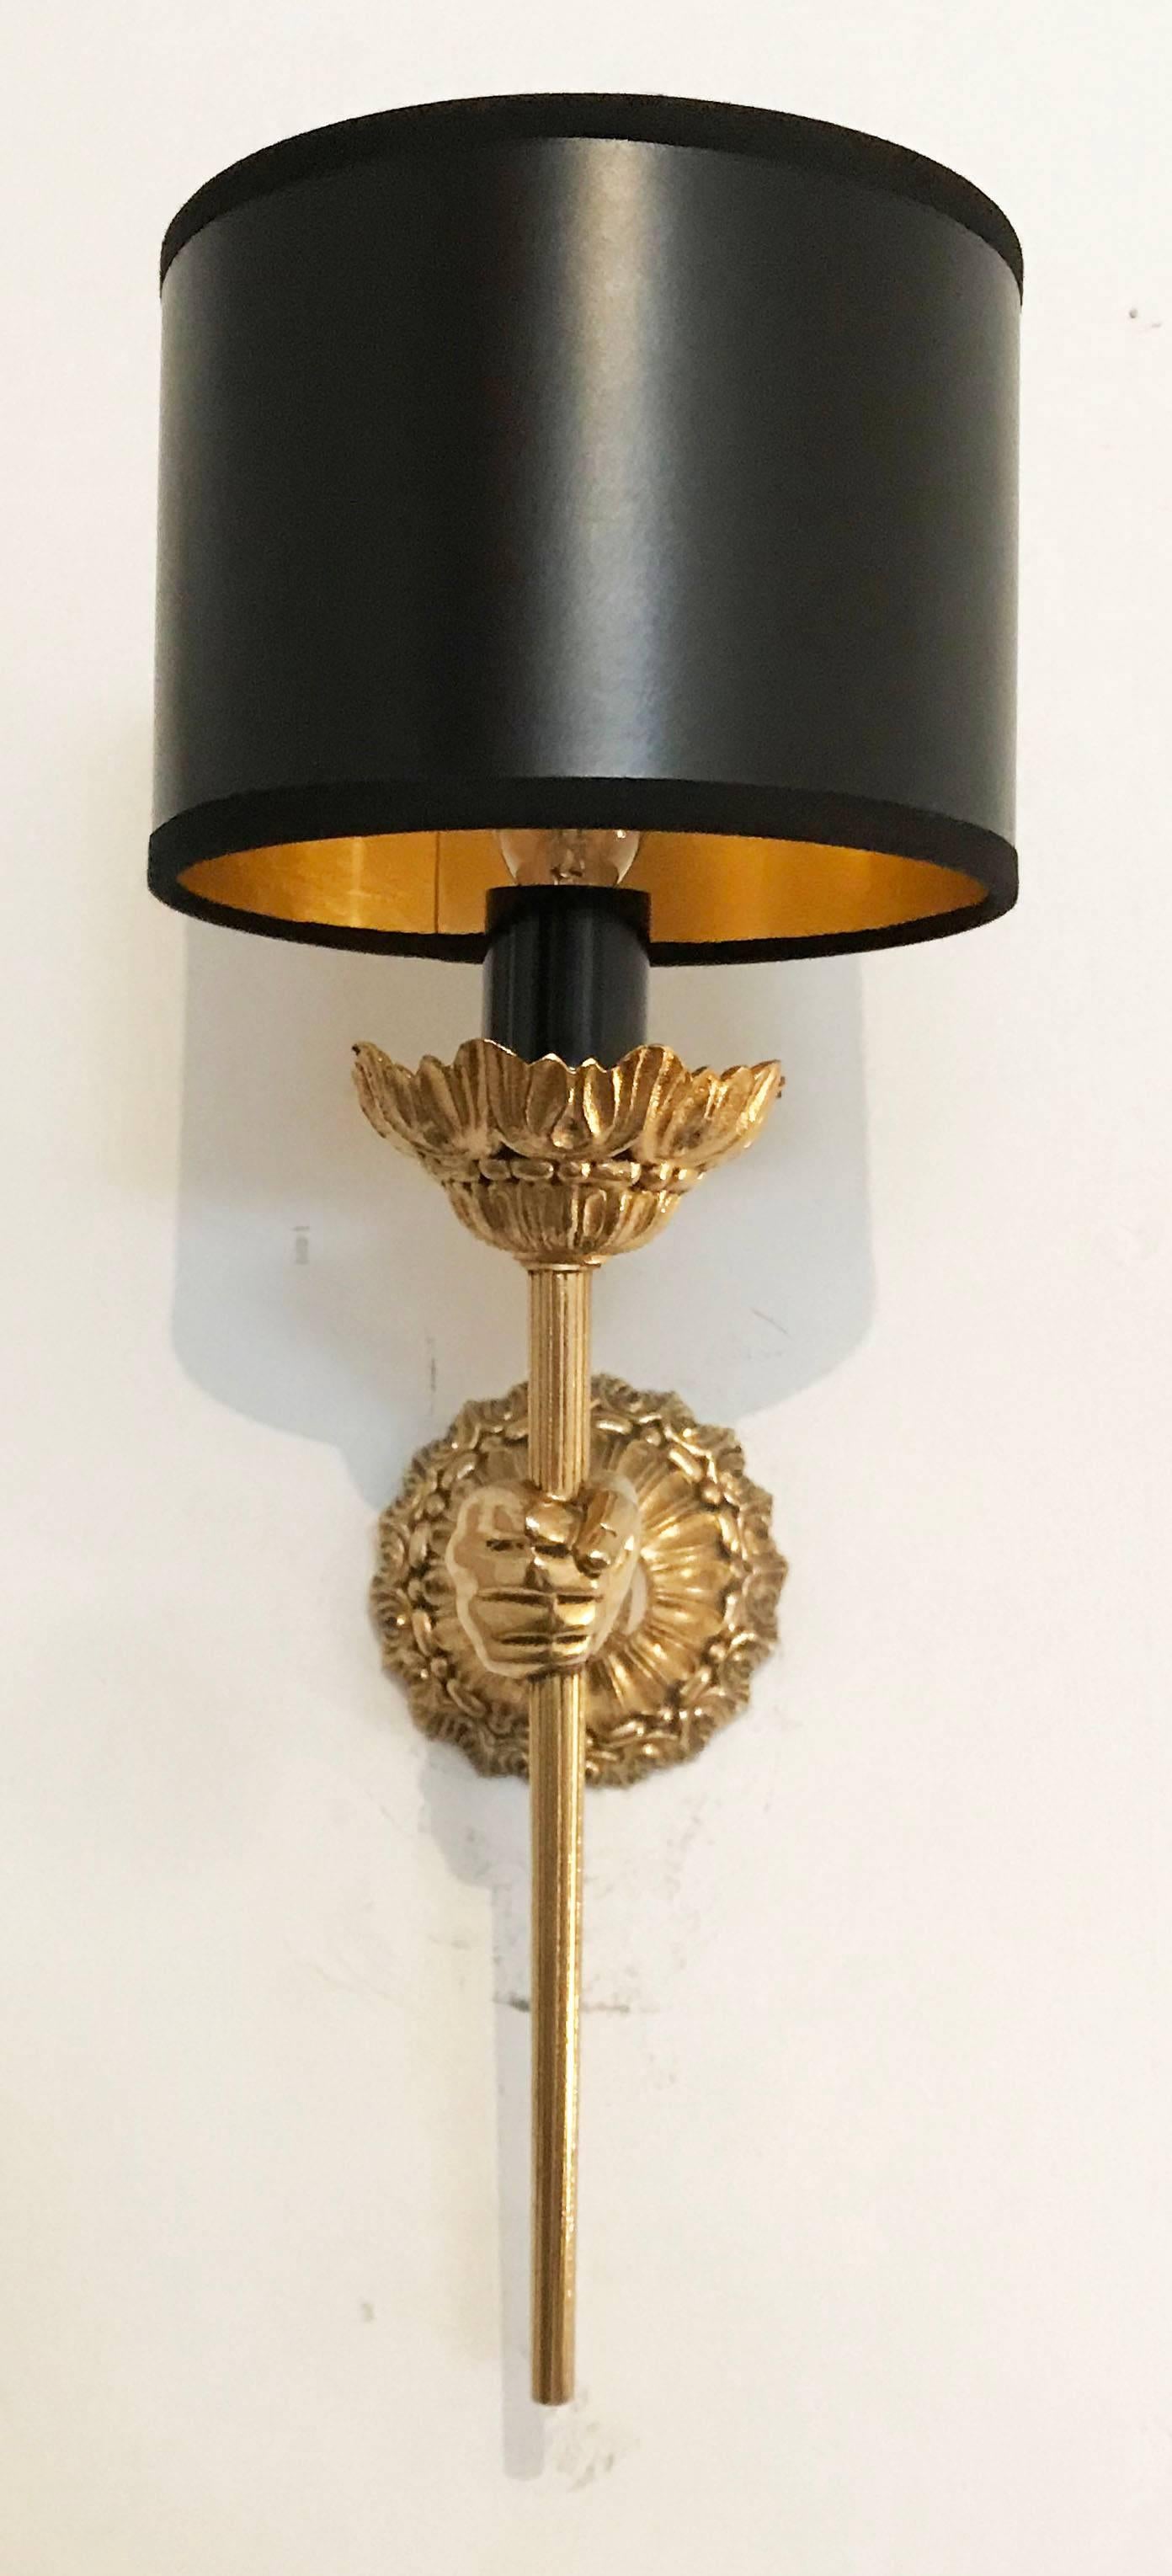 Pair of Maison Lancel “ Hand “ sconces
US rewired and in working condition
40 watts max bulb.

Back plate: 3 inches diameter.